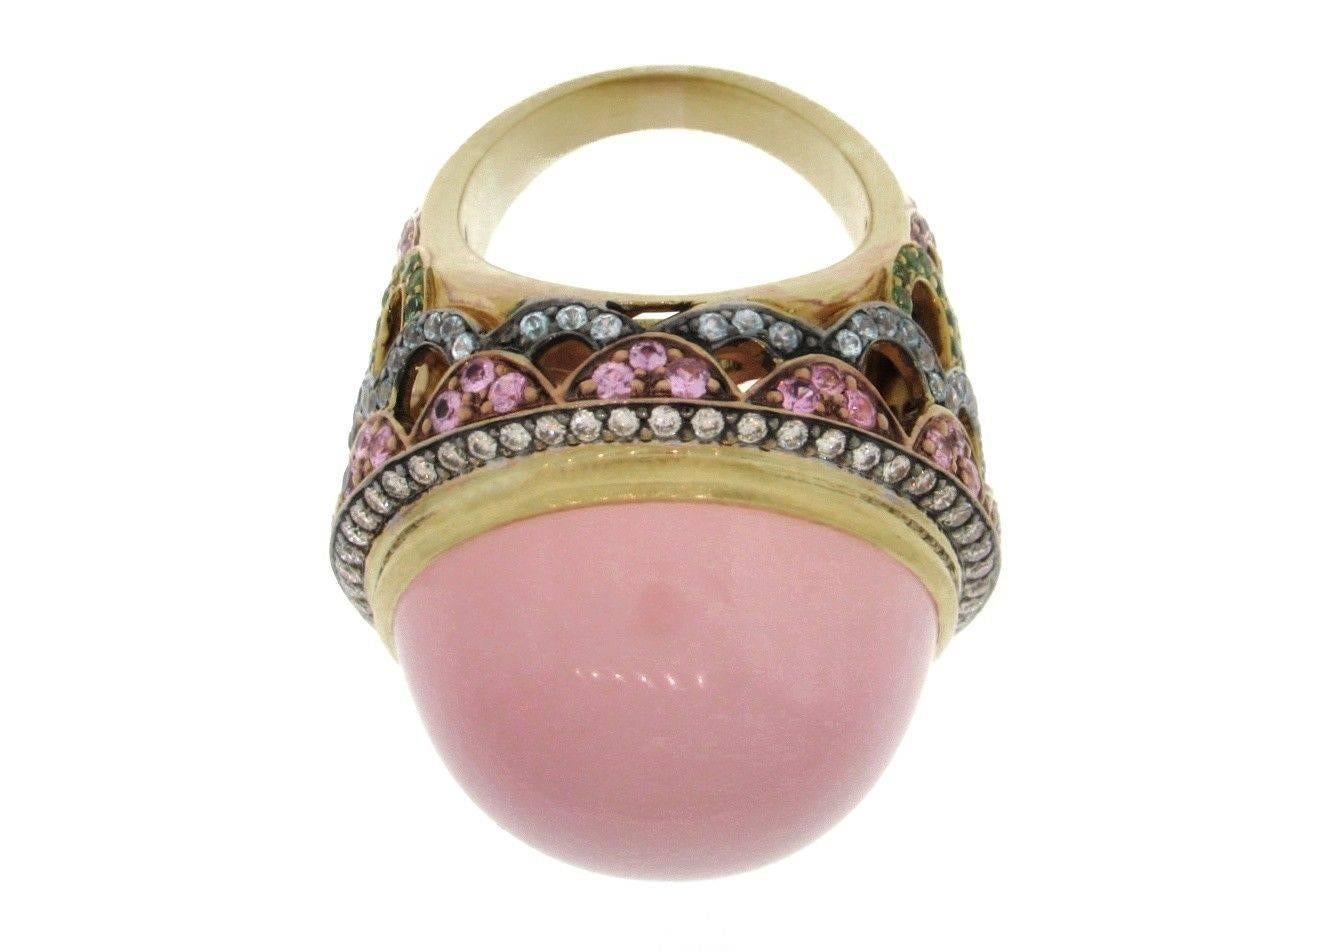 Large Statement Ring by Zorab featuring High Domed Rose Quartz Round Cabochon
surrounded by Round Brilliant Diamonds approx .75 ct, VS2-SI1 clarity, H-I color estimated.
Open Scalloped setting in 18k Yellow Gold featuring Pink Sapphires, Blue Topaz,